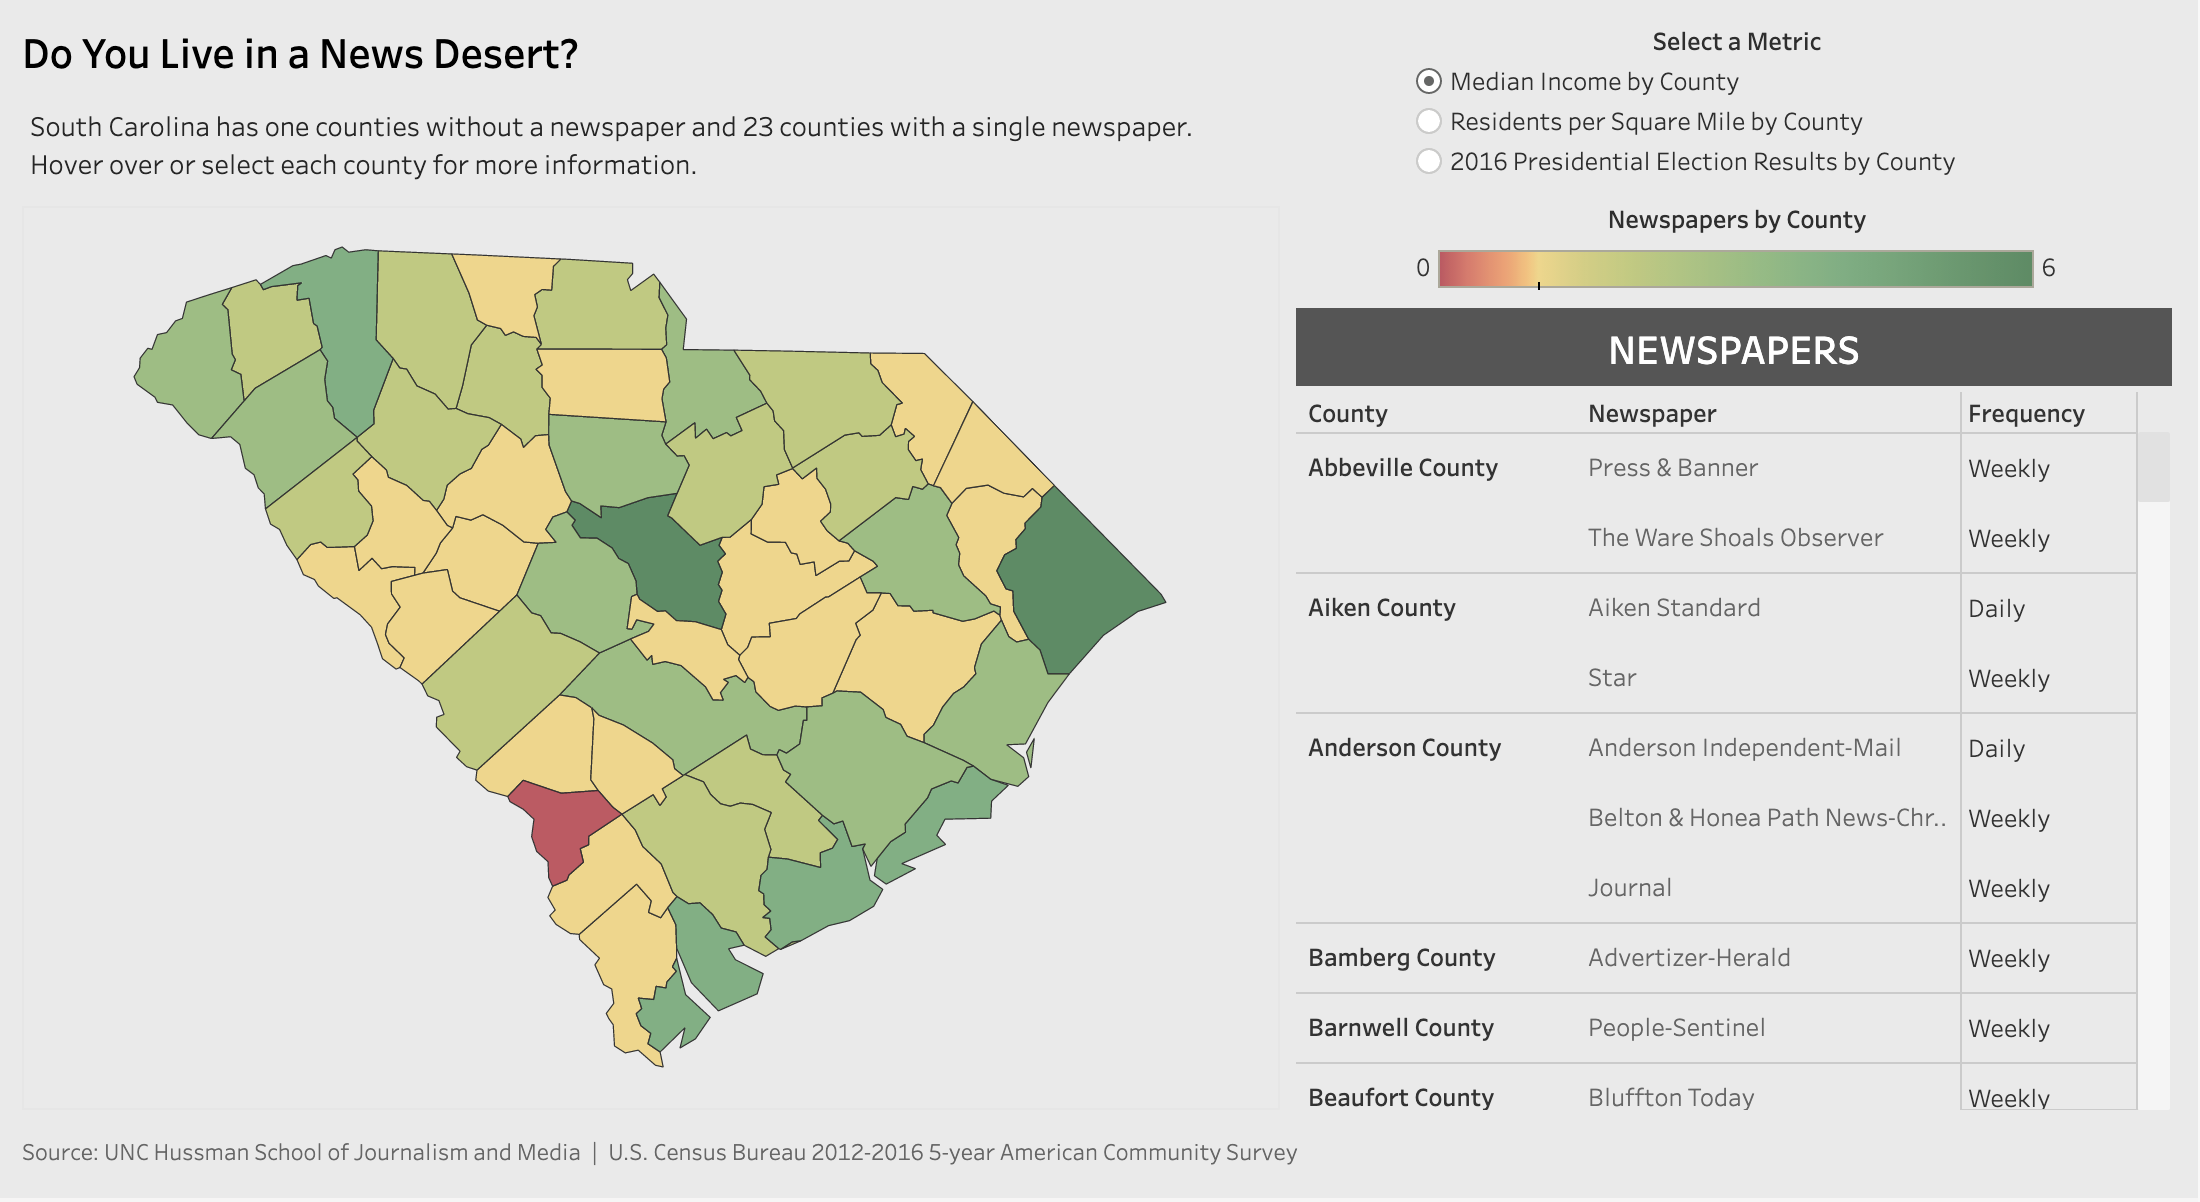 Many counties in South Carolina are news deserts where residents have little access to accurate, unbiased news.